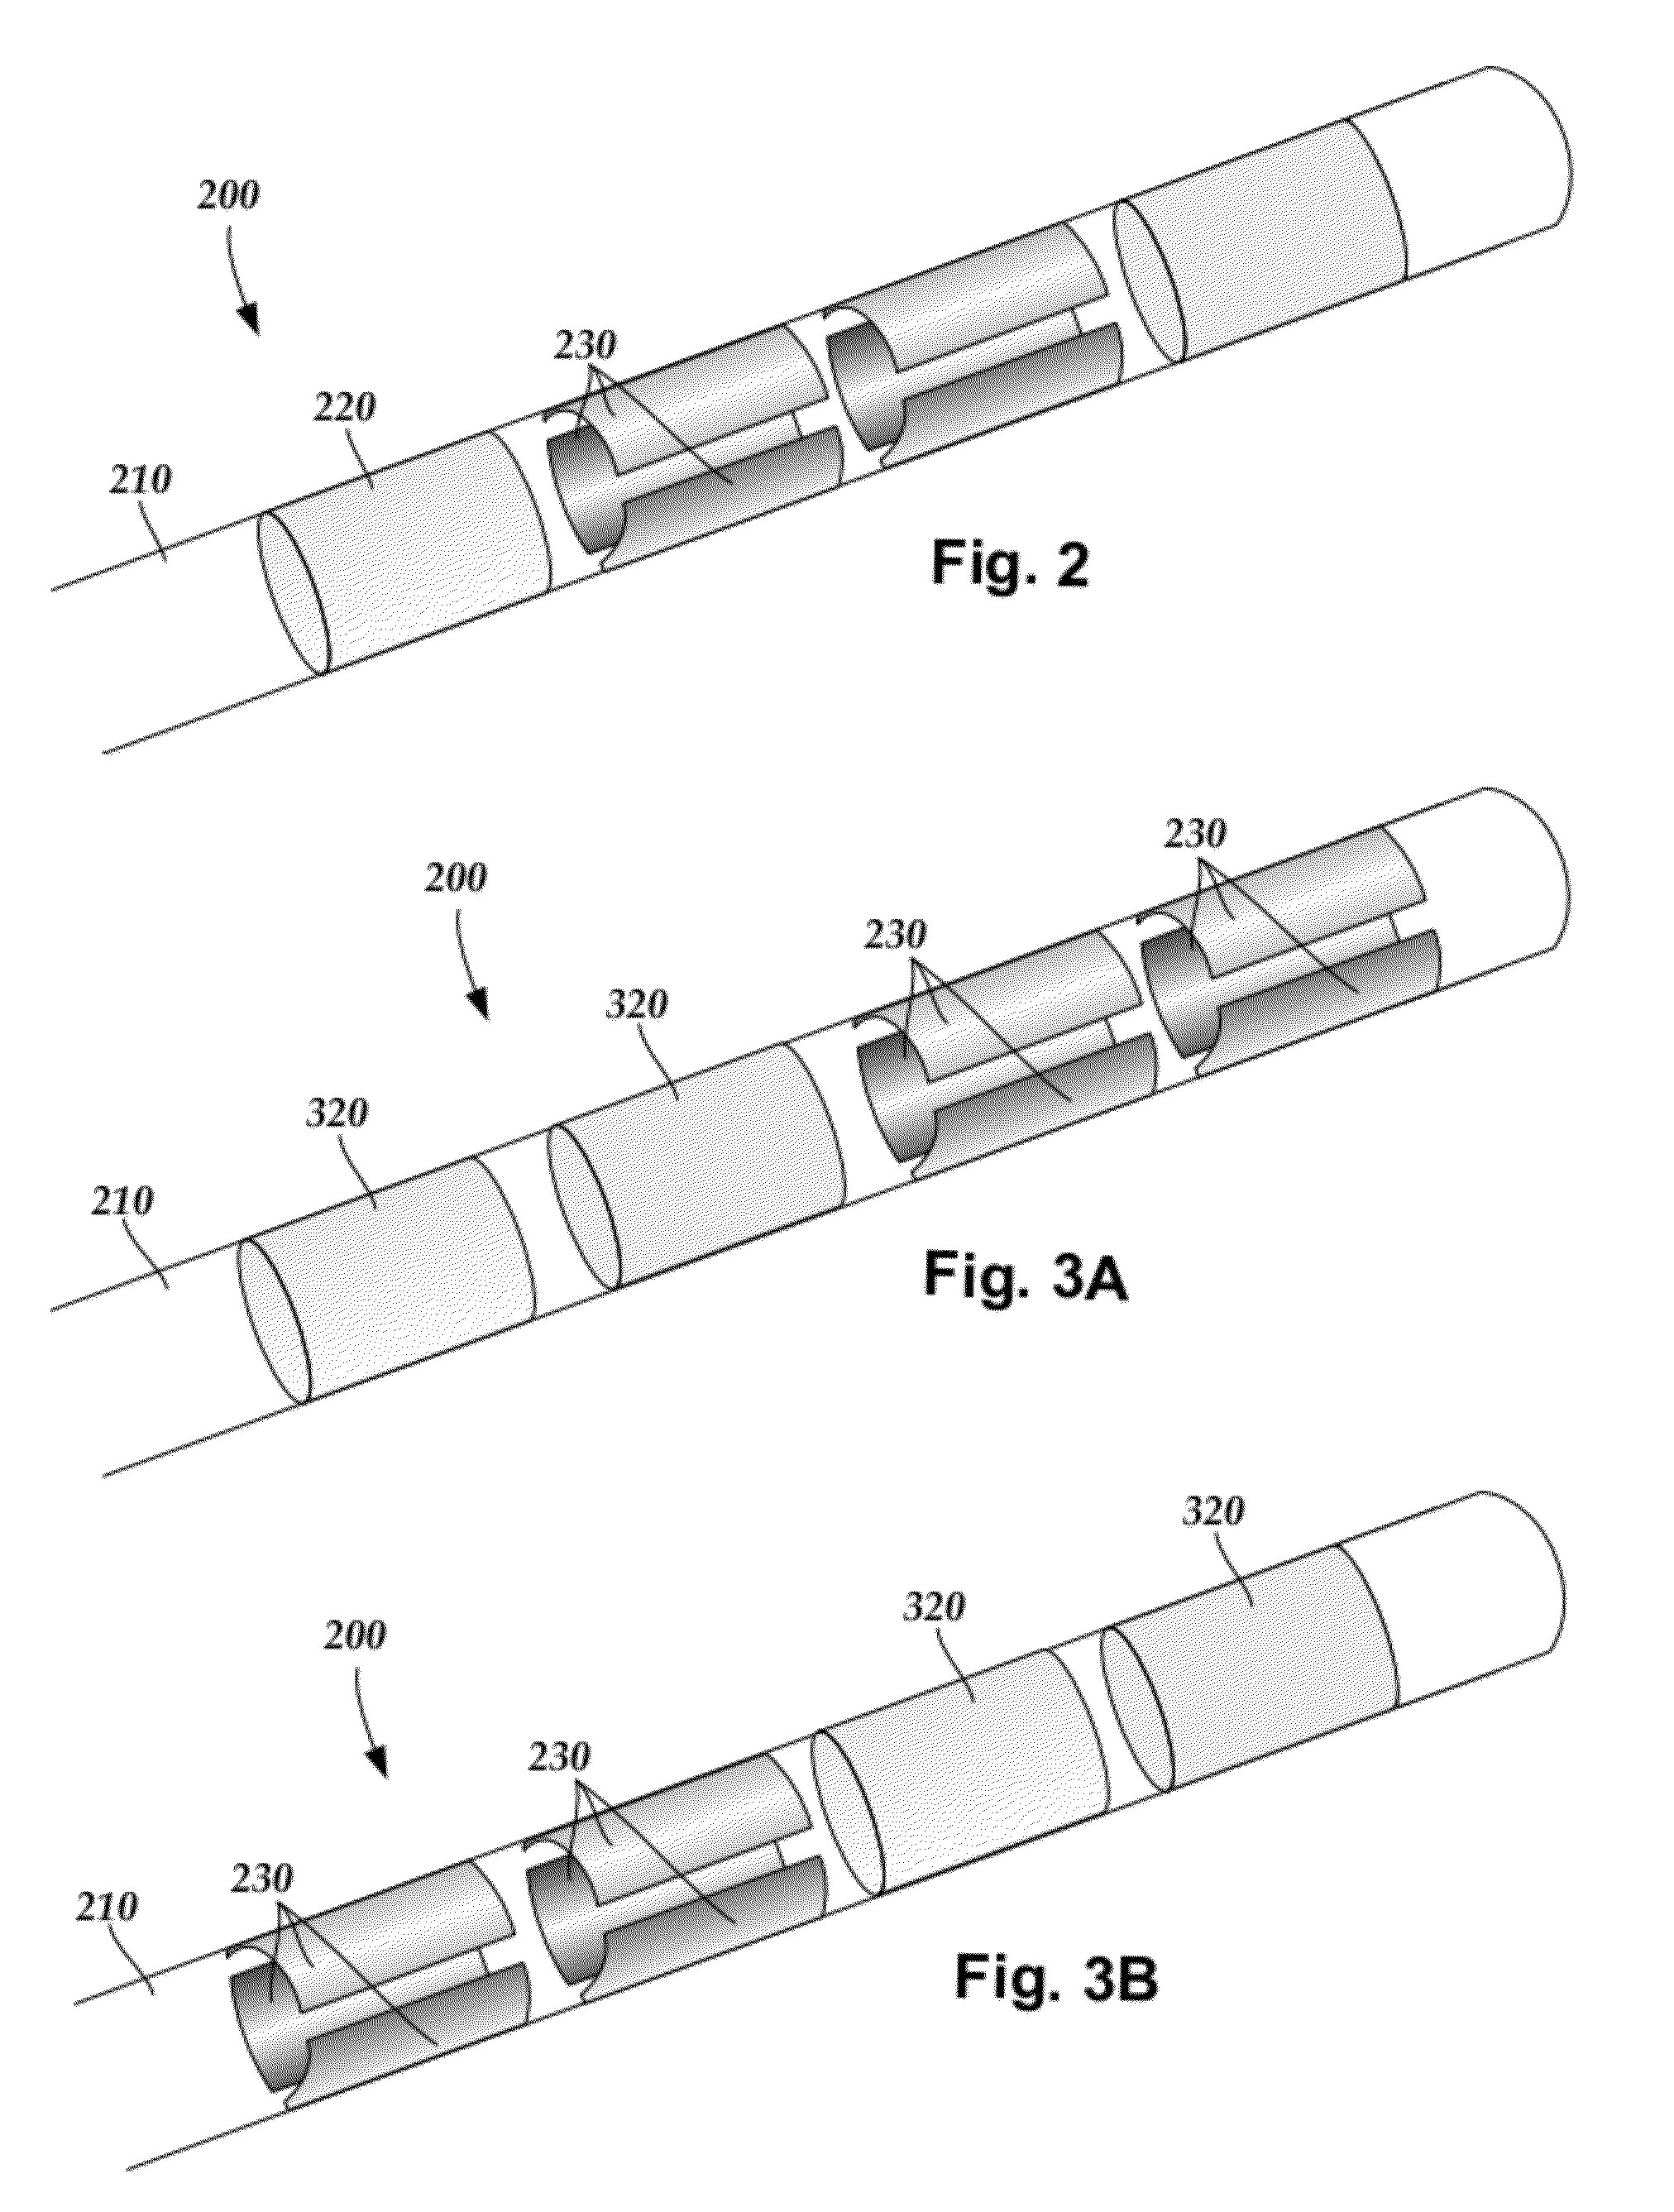 Methods for making leads with segmented electrodes for electrical stimulation systems